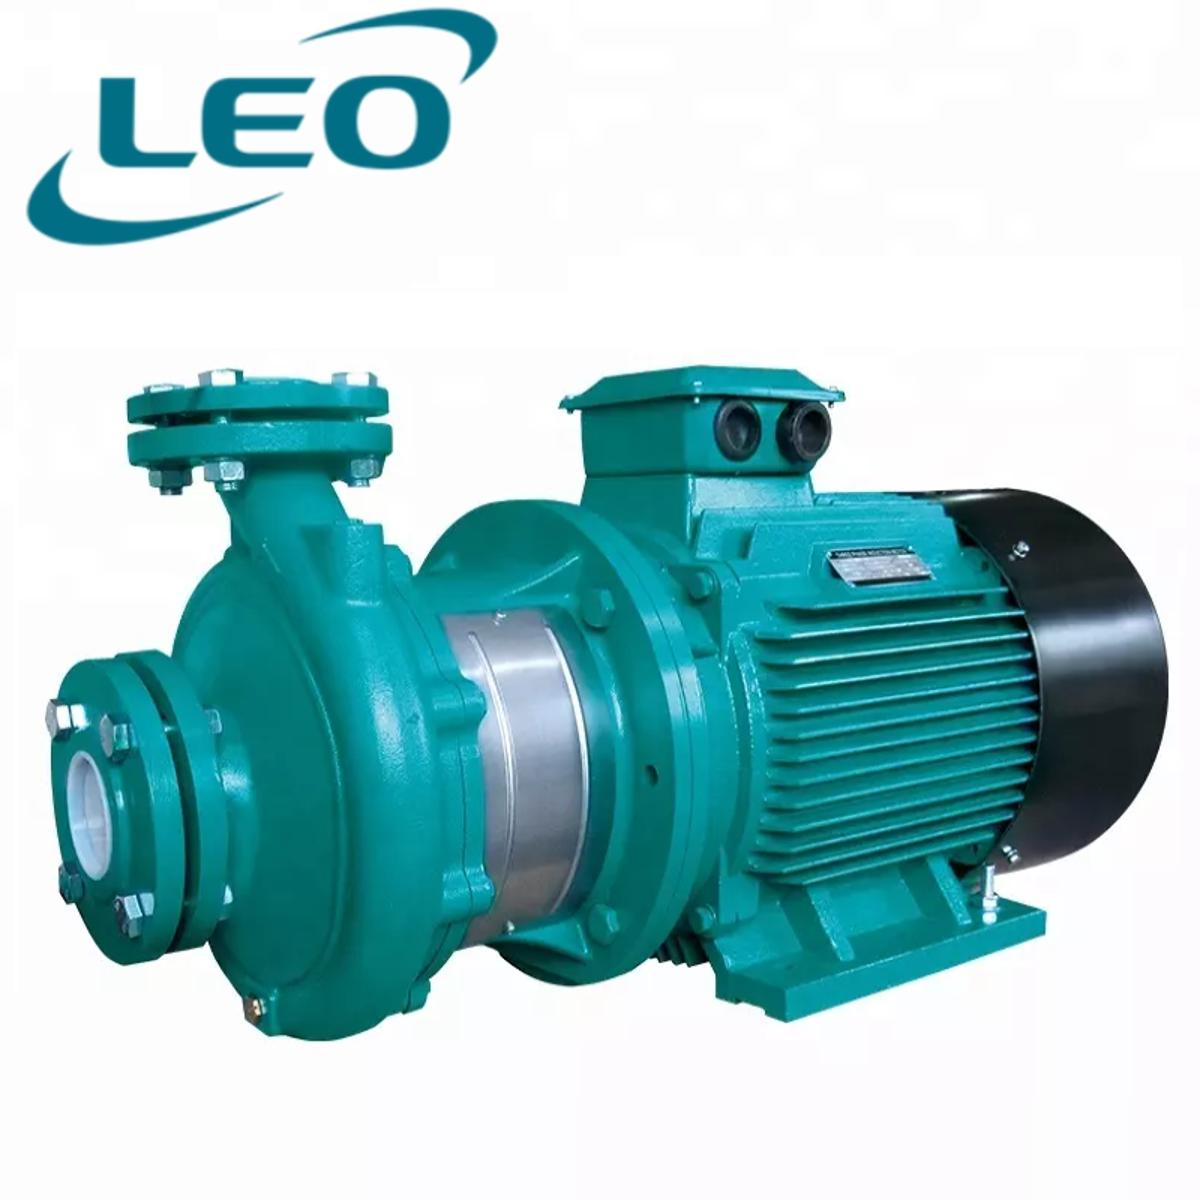 LEO - XST-40-250-110 - 11000 W - 15 HP - Clean Water HEAVY DUTY Centrifugal Pump With FLANGES  - 380V~400V THREE PHASE - SIZE :- 2 1-2" x 1 1-2 " - European STANDARD